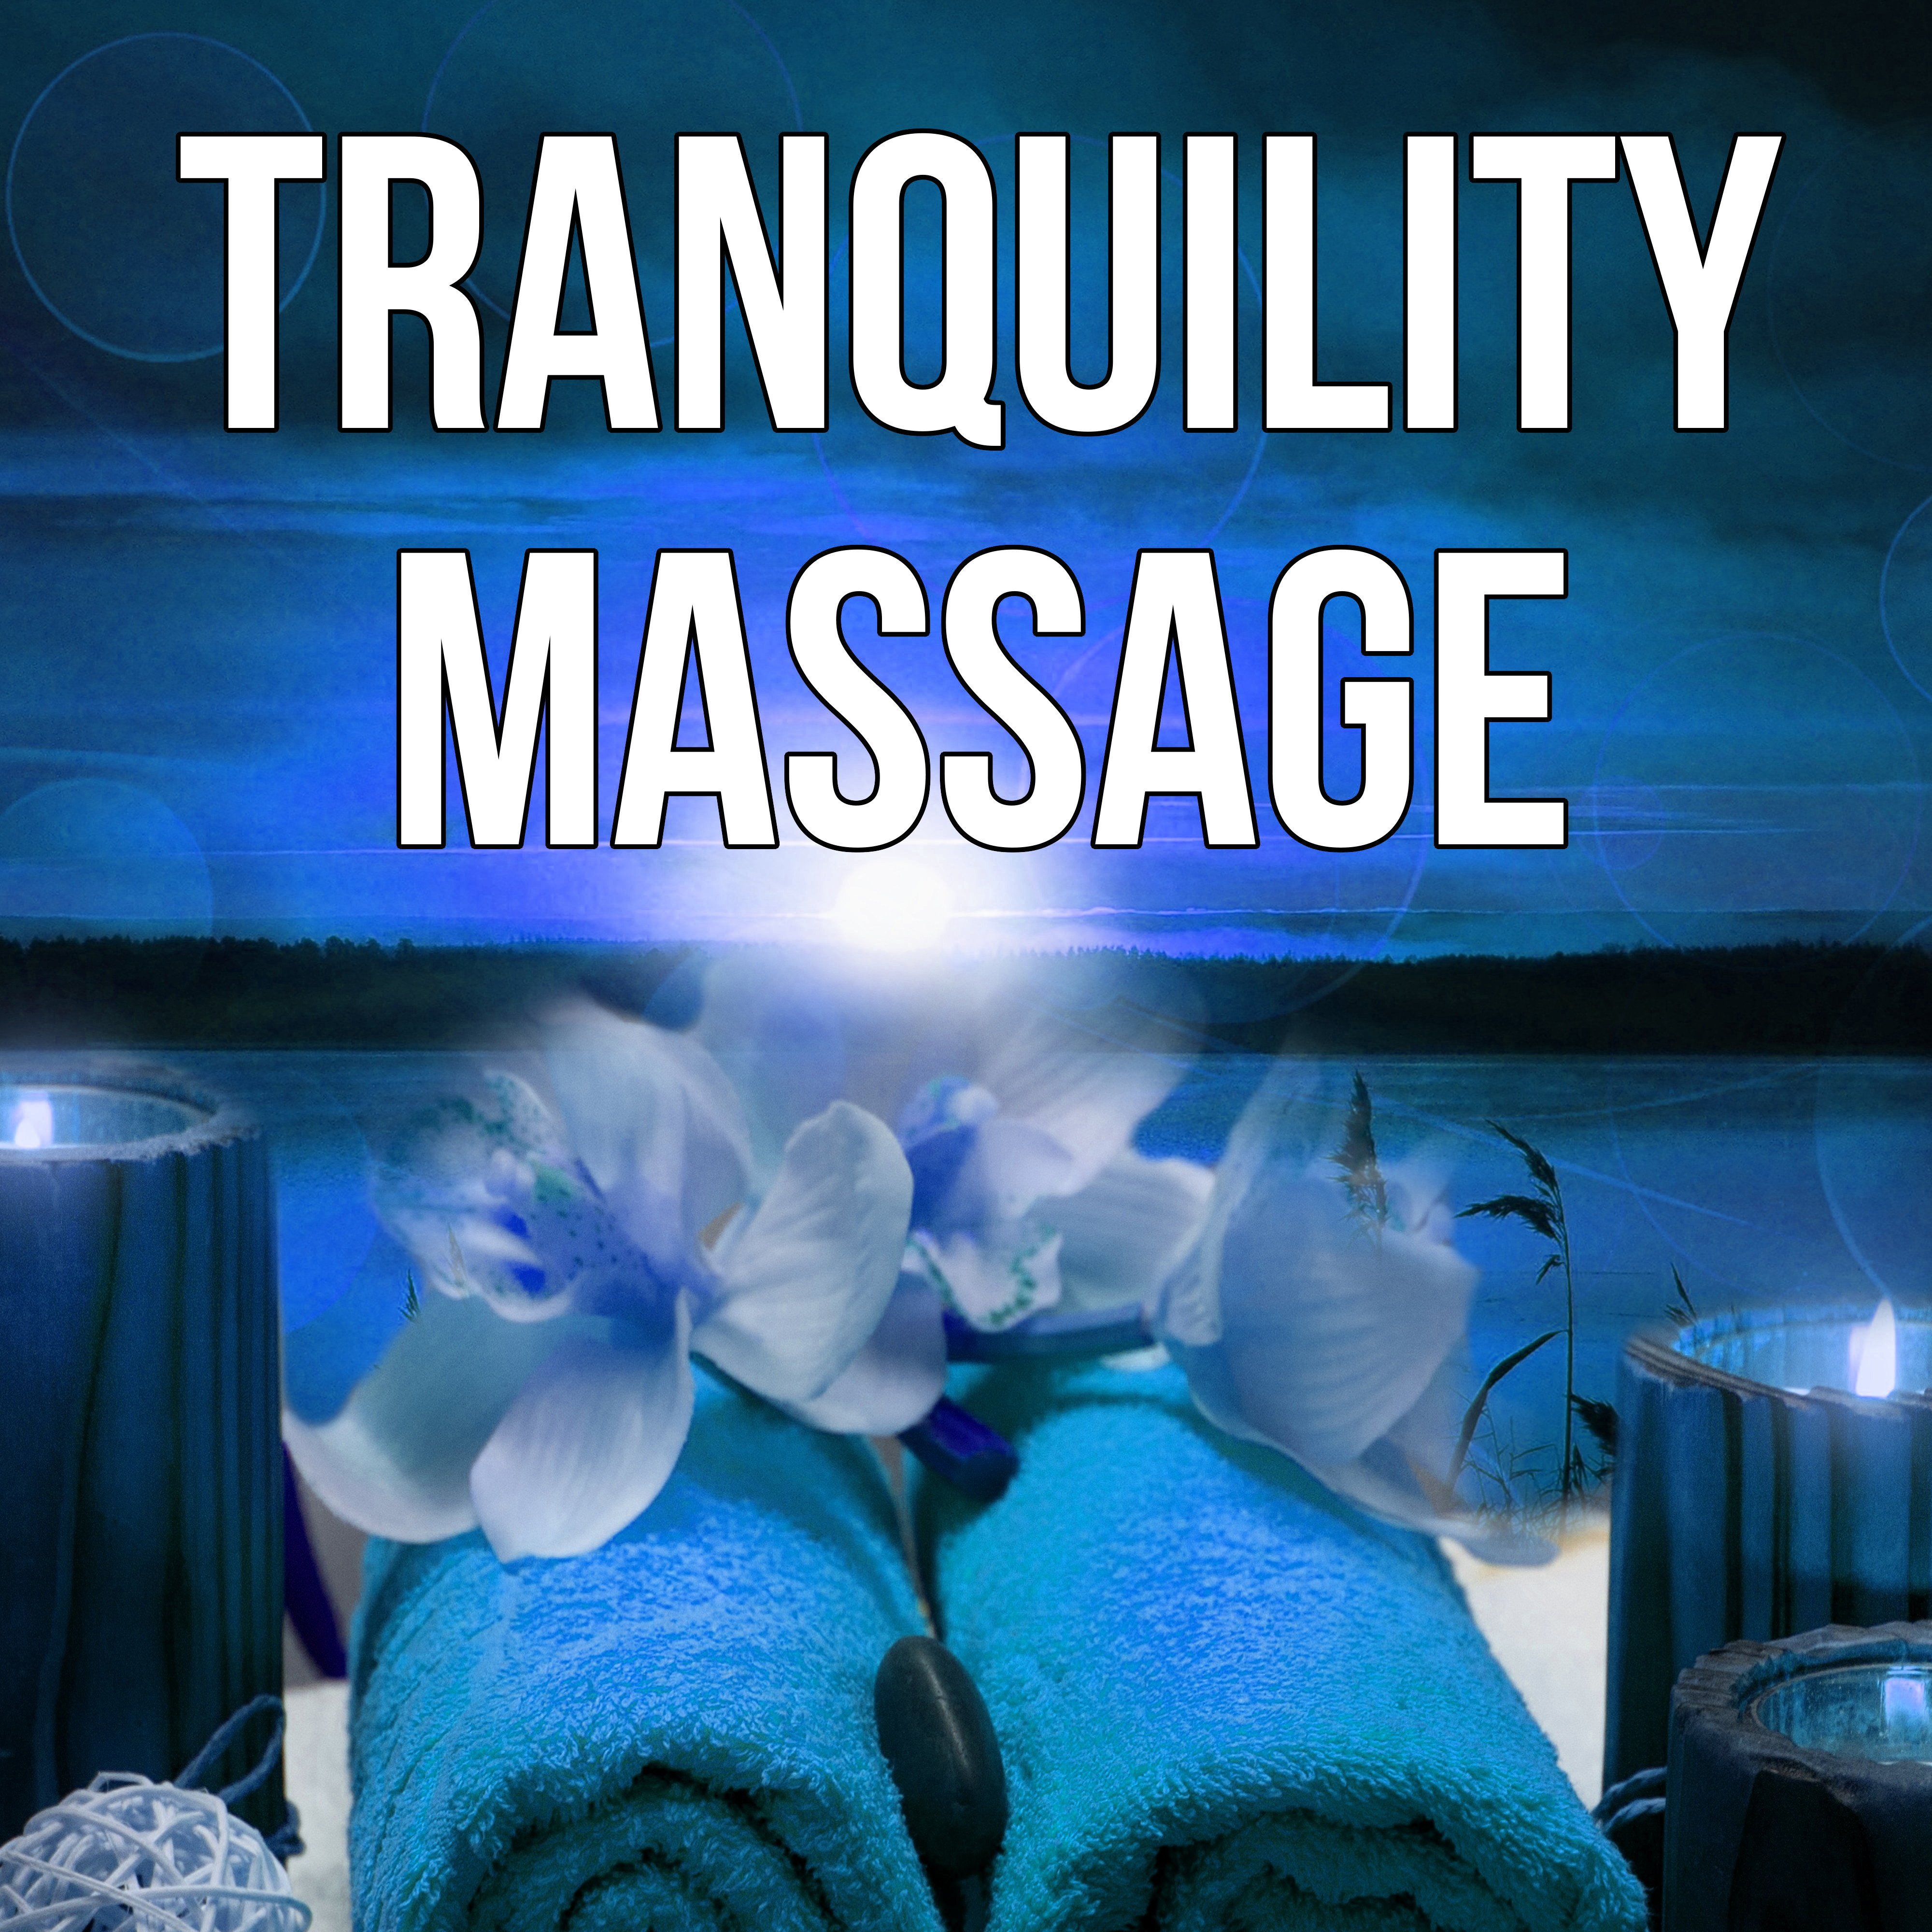 Tranquility Massage -  Erotic Massage Music, Sea Sounds, Flute Music, Music for Peace, Night Sounds and Piano for Reiki Healing, Ocean Waves